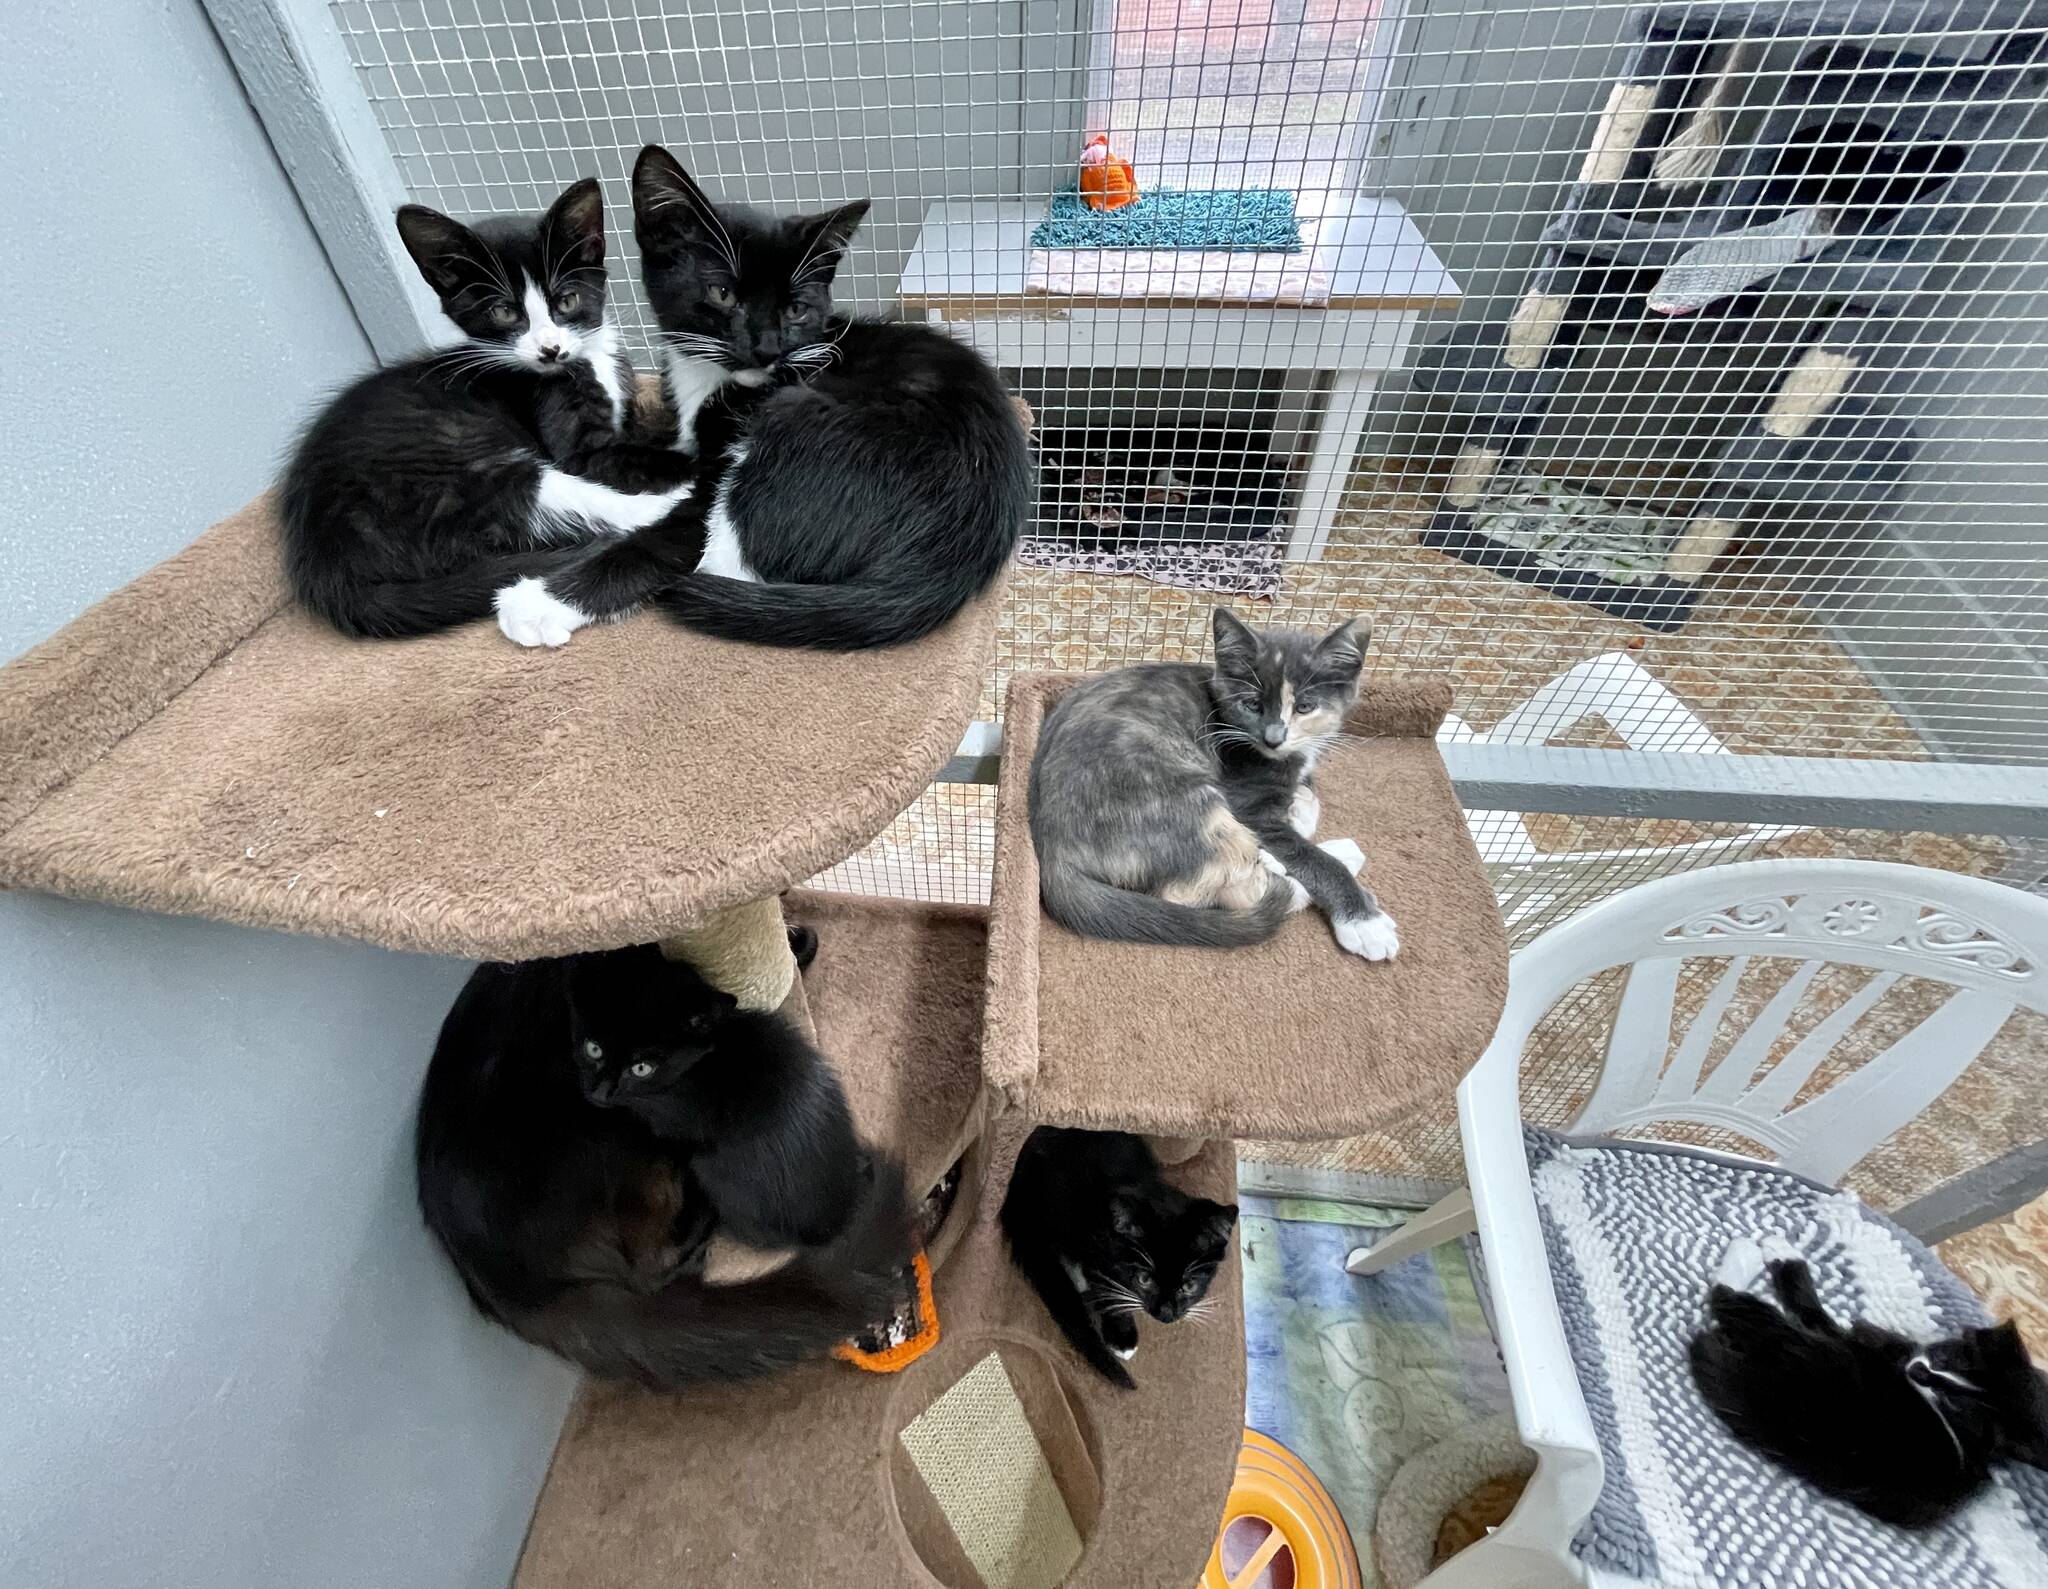 Michael S. Lockett | The Daily World
Kittens lounge languorously at PAWS of Grays Harbor on Oct. 4, 2022. The shelter is holding a fundraiser on Oct. 8 to raise money for renovations.